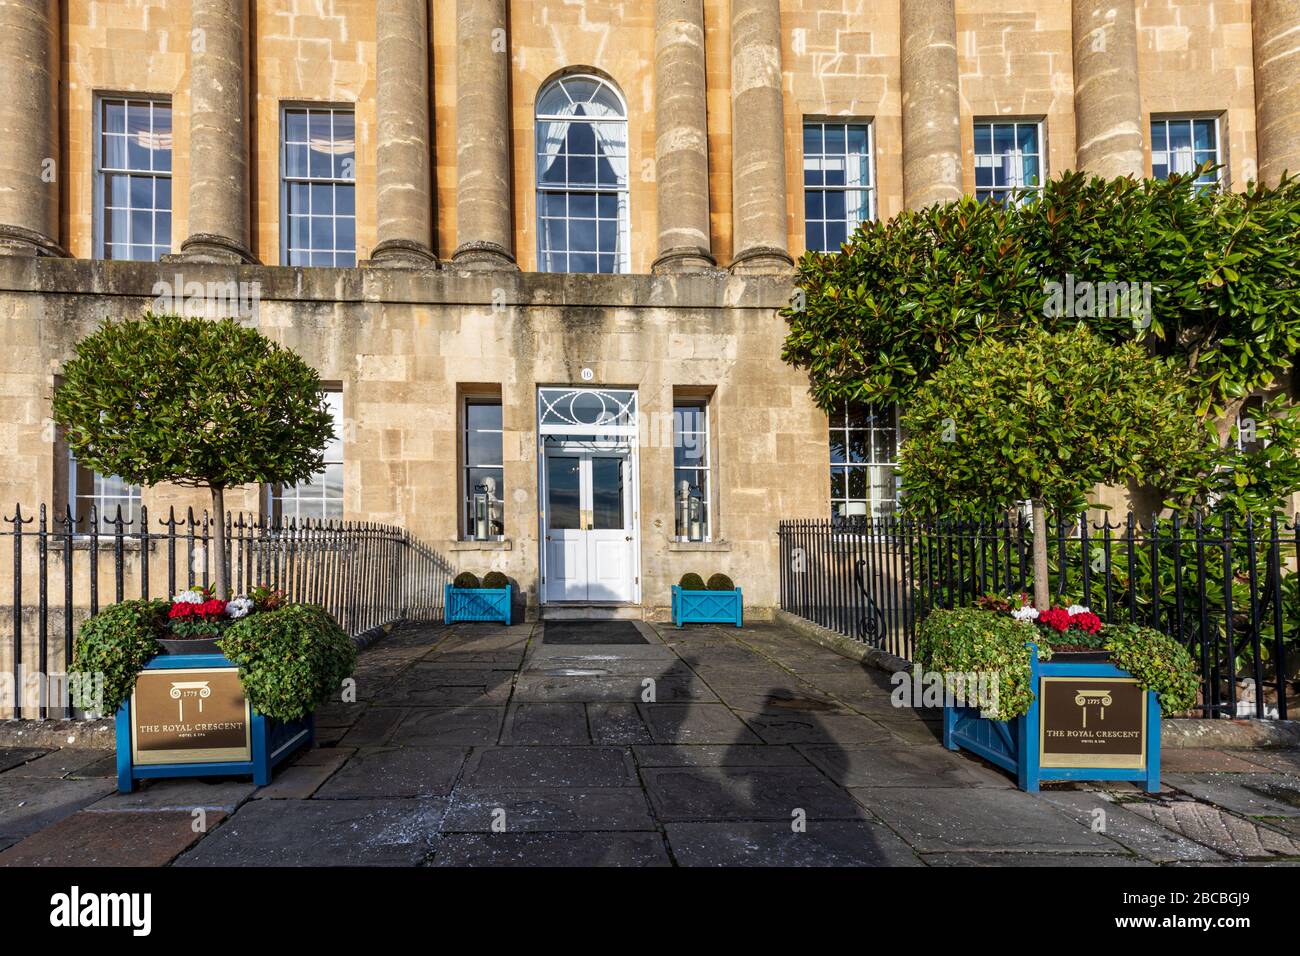 Entrance to the the Royal Crescent Hotel & Spa, Bath, Somerset, UK Stock Photo